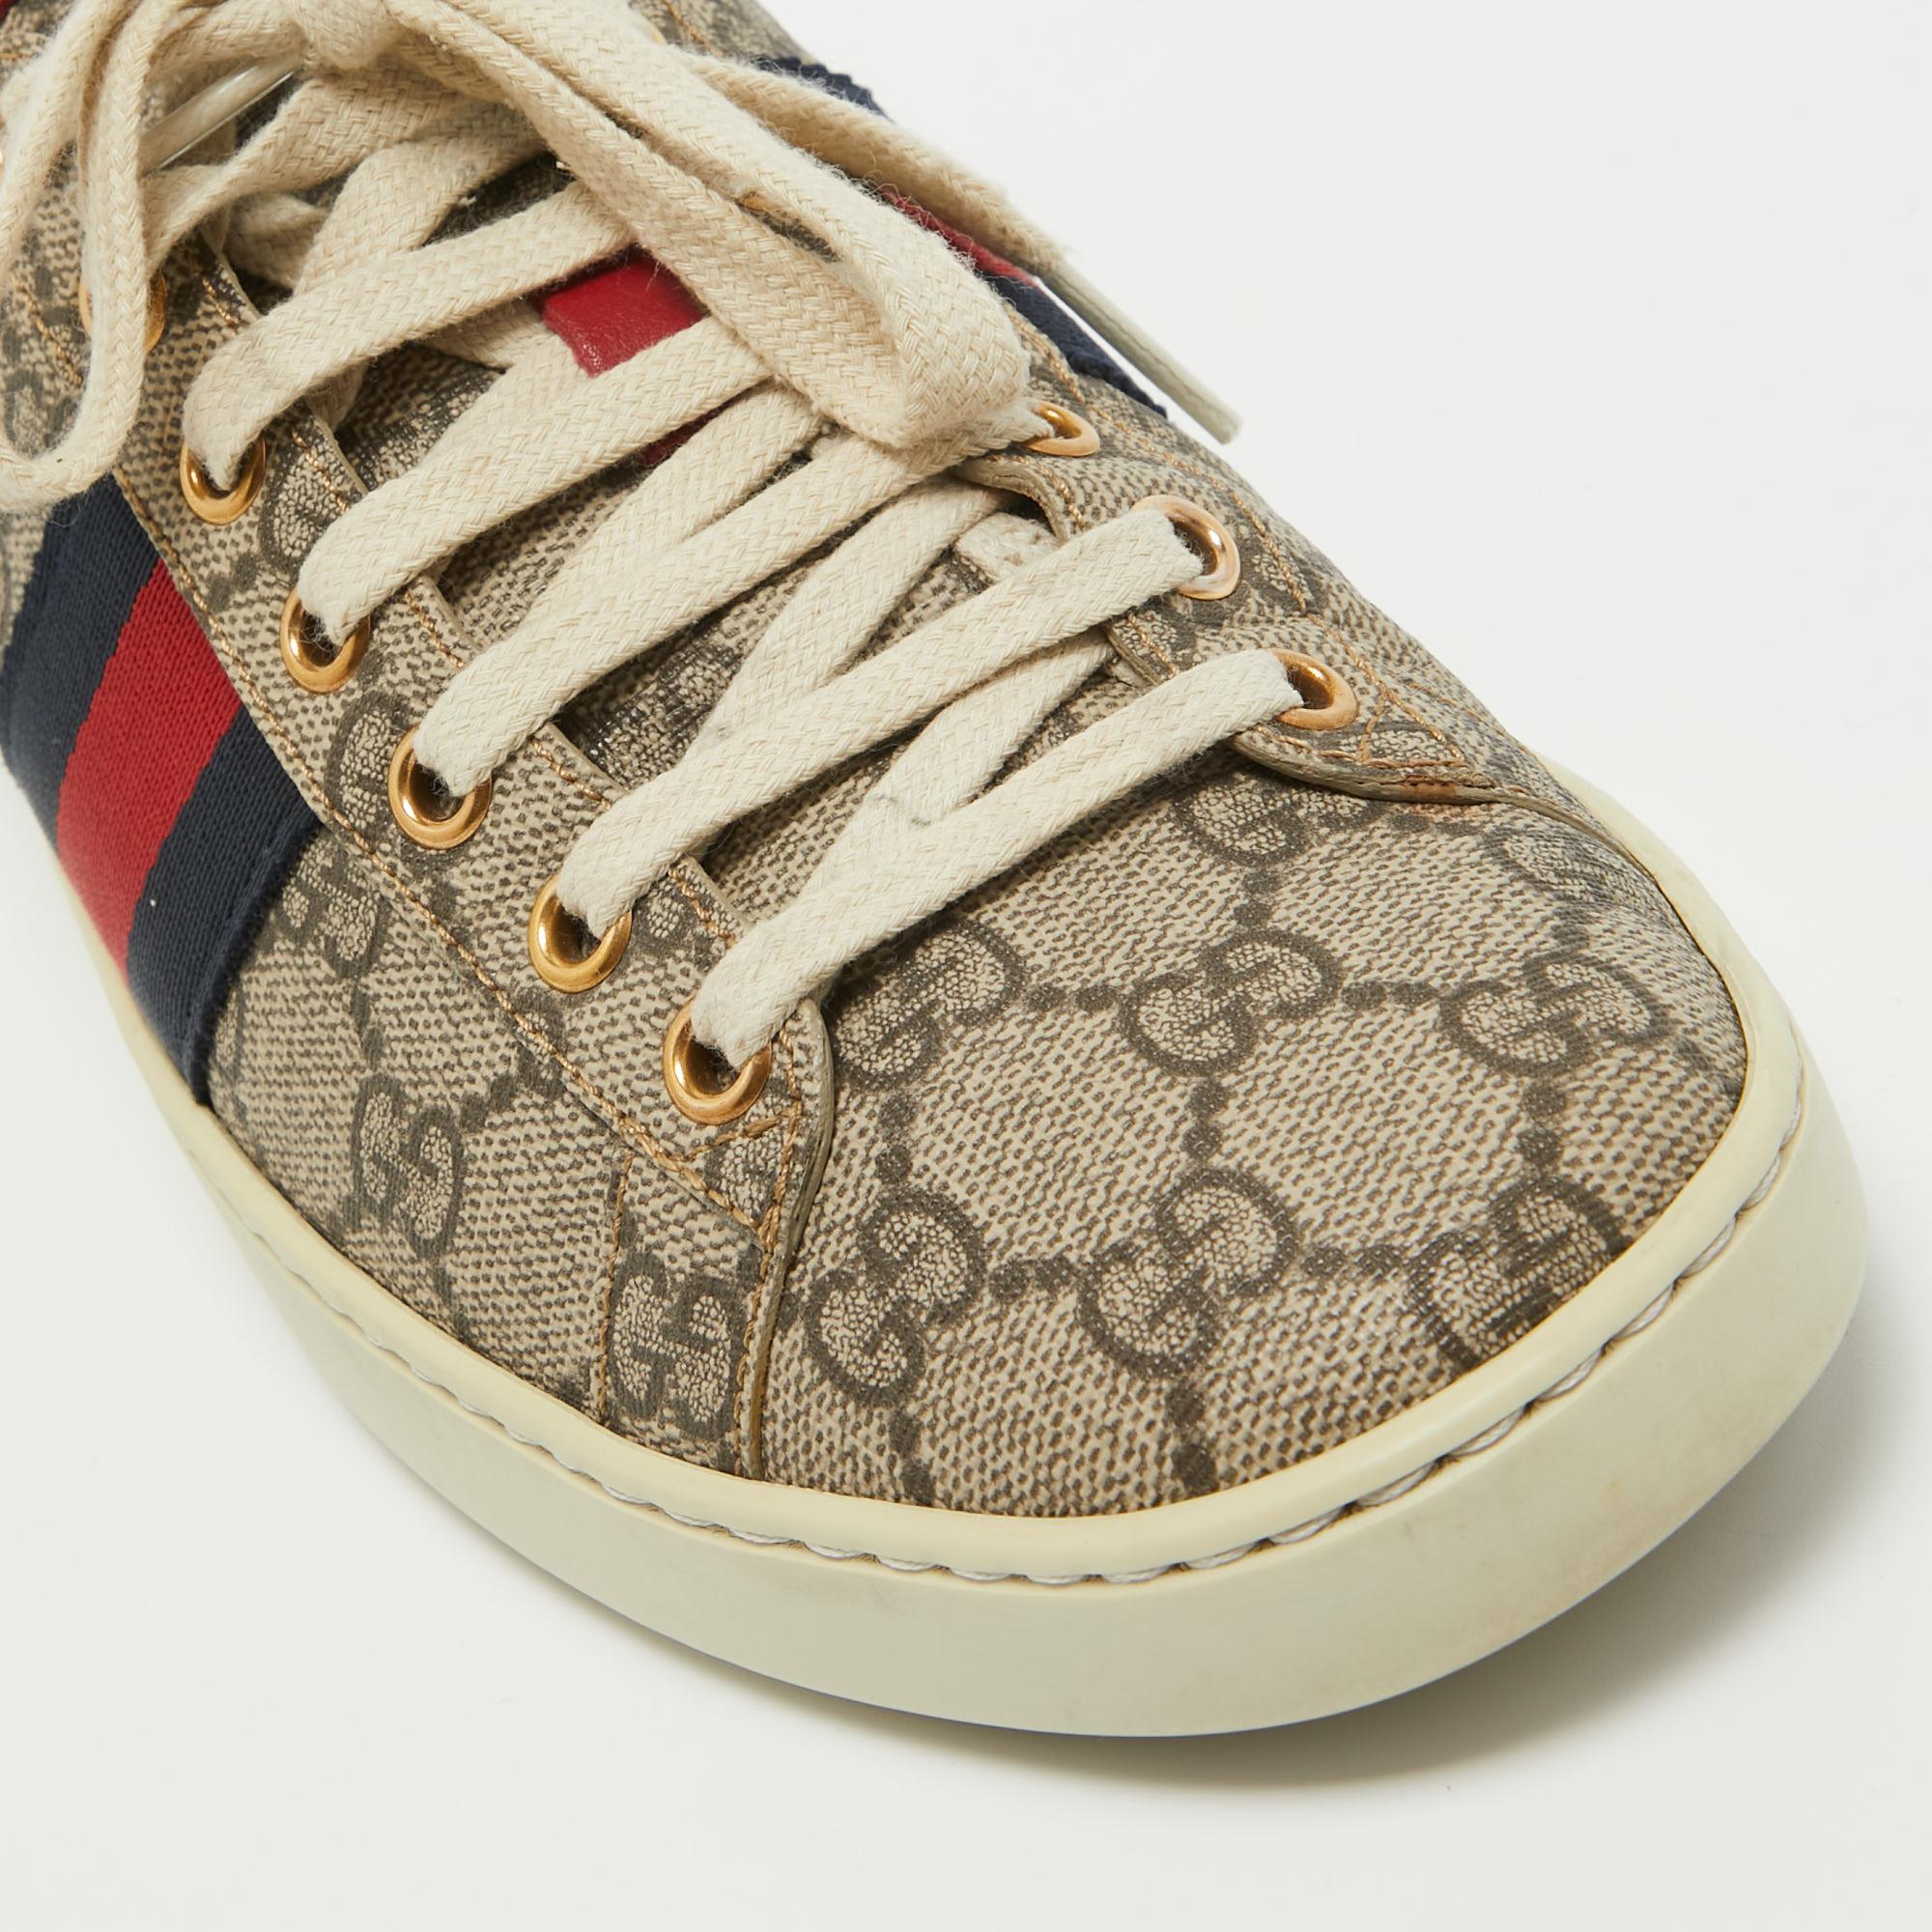 Gucci Brown/Beige Monogram Canvas Ace Low Top Sneakers Size 37.5 3